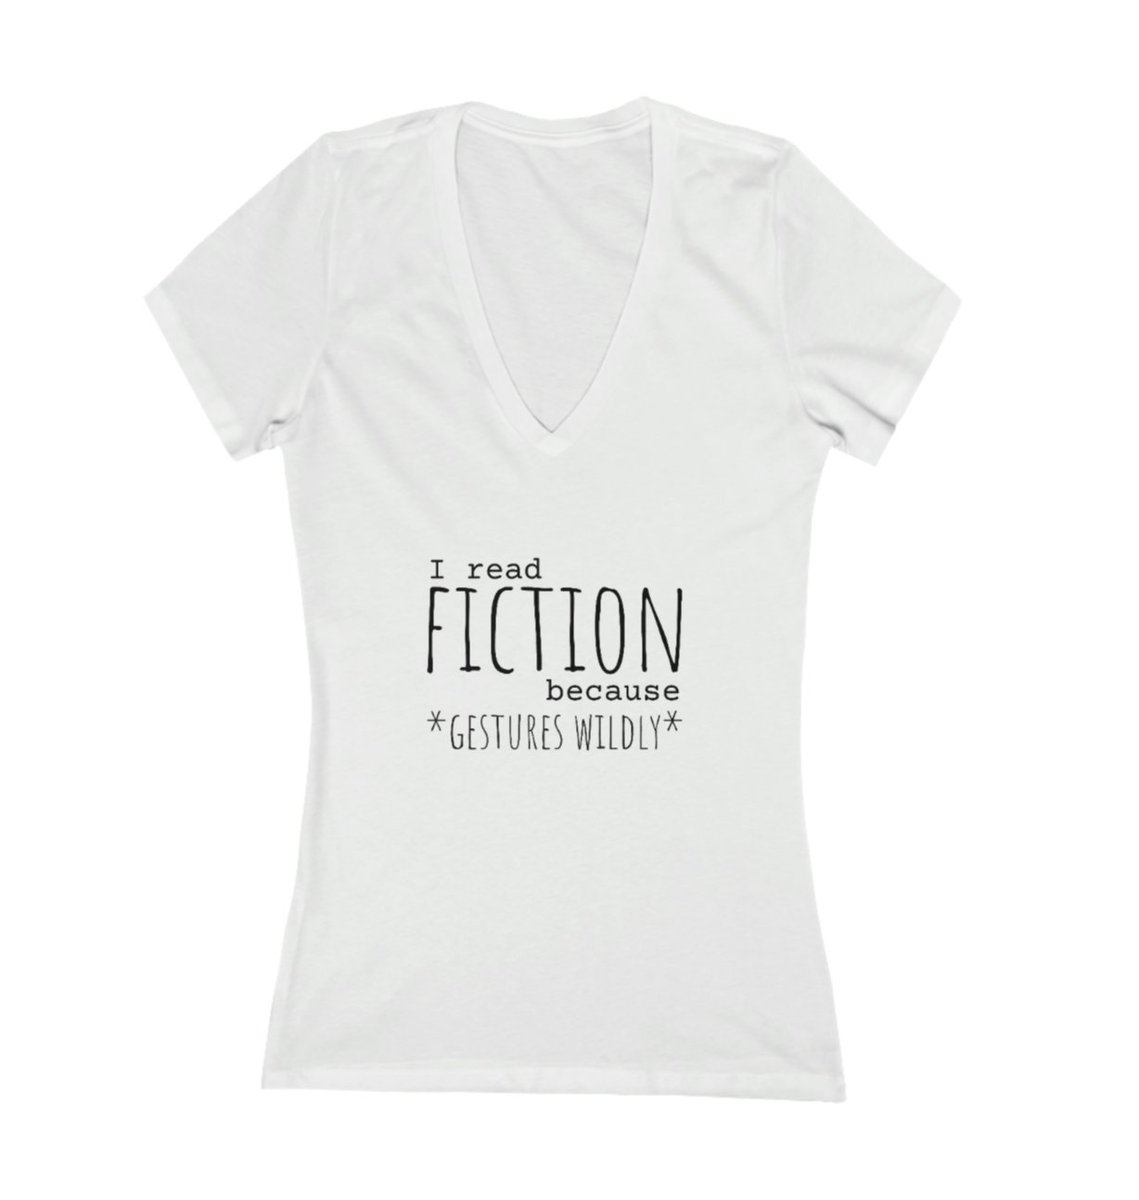 I started making t-shirts on Etsy in my spare time. My husband doesn't get this one, but I thought it was funny. What do you think? 

#readersoftiktok #reading #writingcommunity